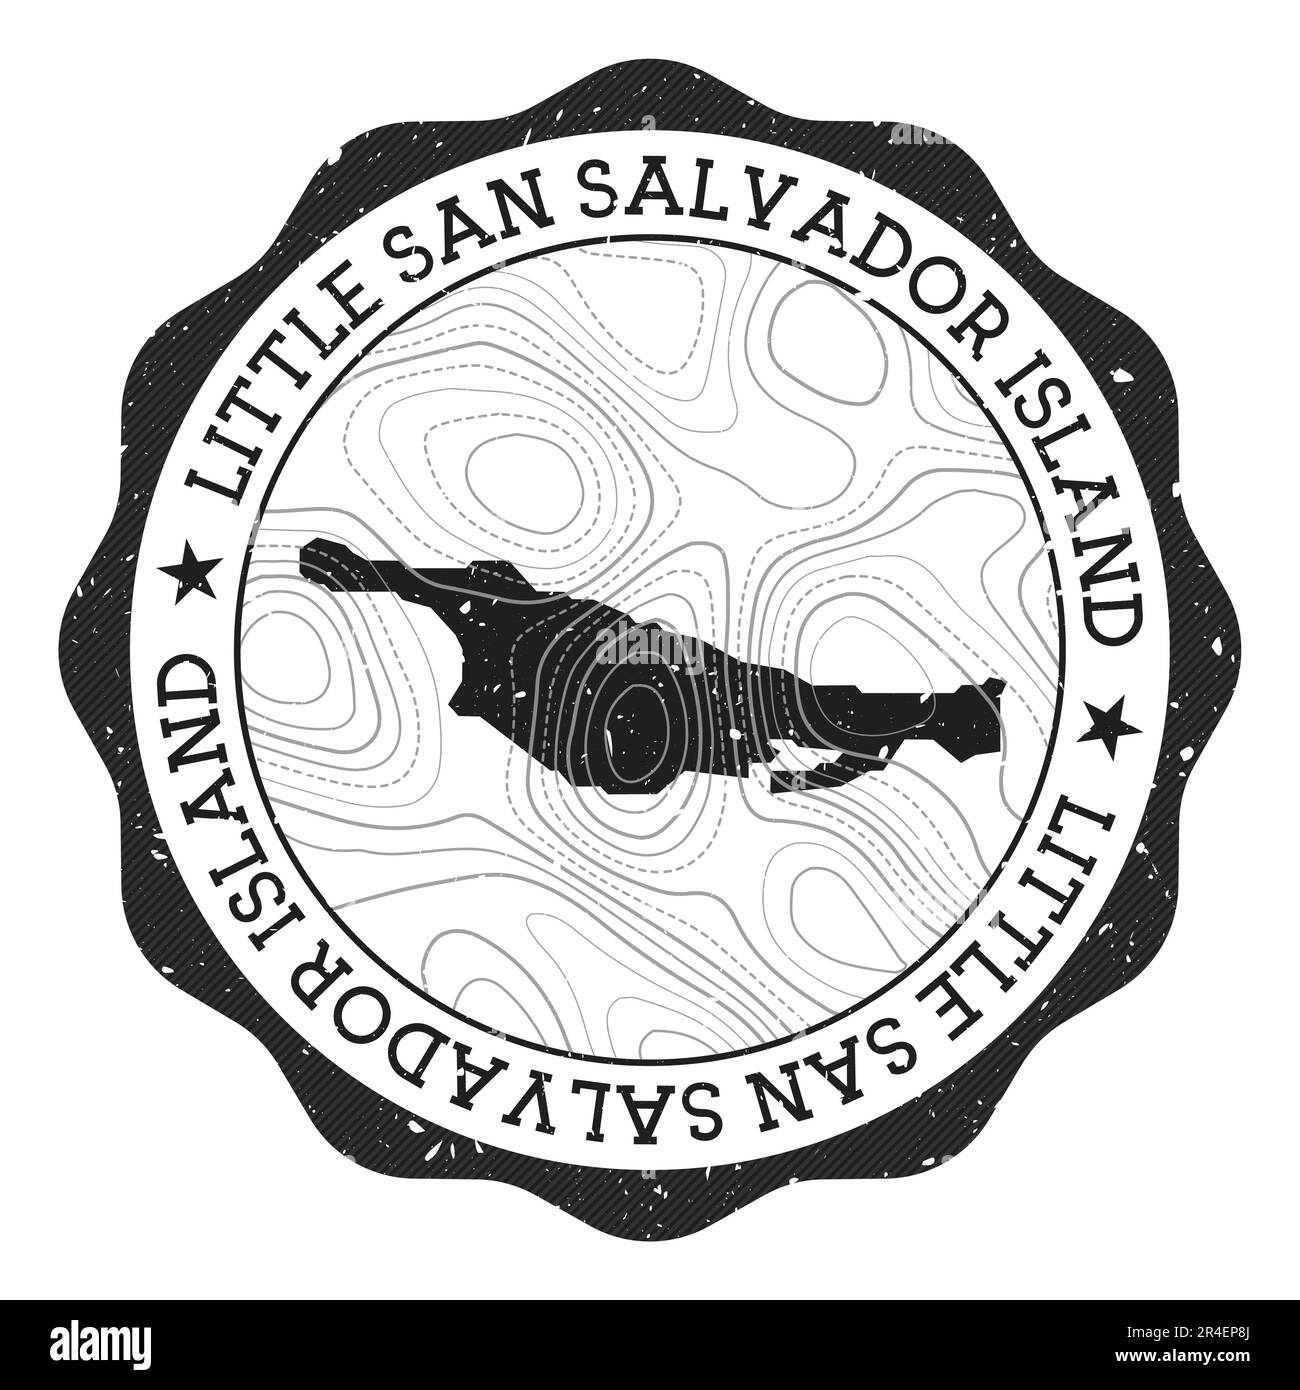 Little San Salvador Island outdoor stamp. Round sticker with map of island with topographic isolines. Vector illustration. Stock Vector